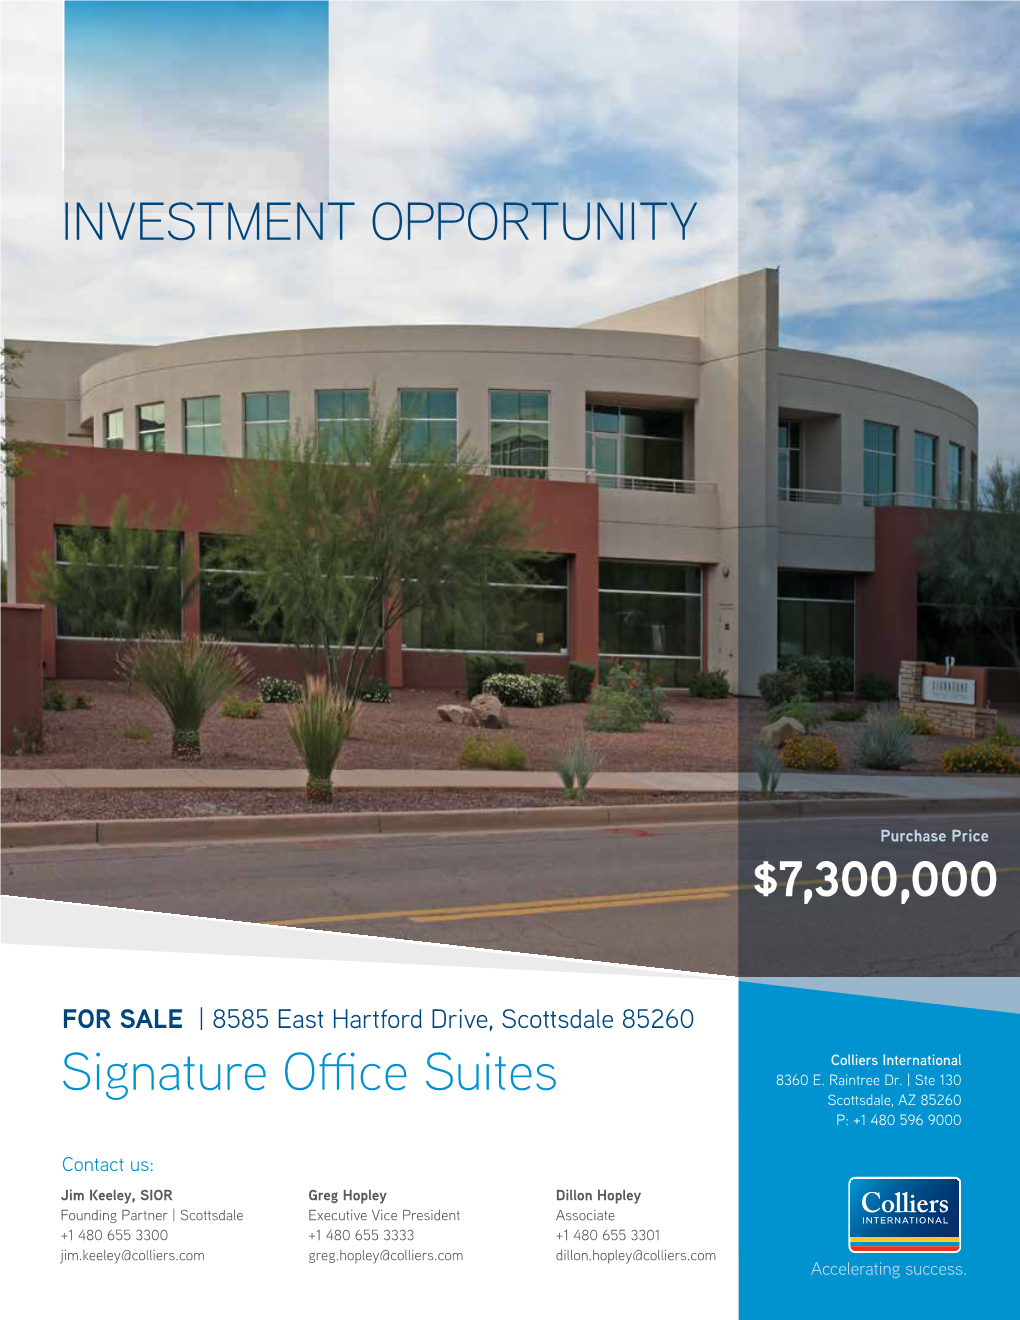 Signature Office Suites INVESTMENT OPPORTUNITY